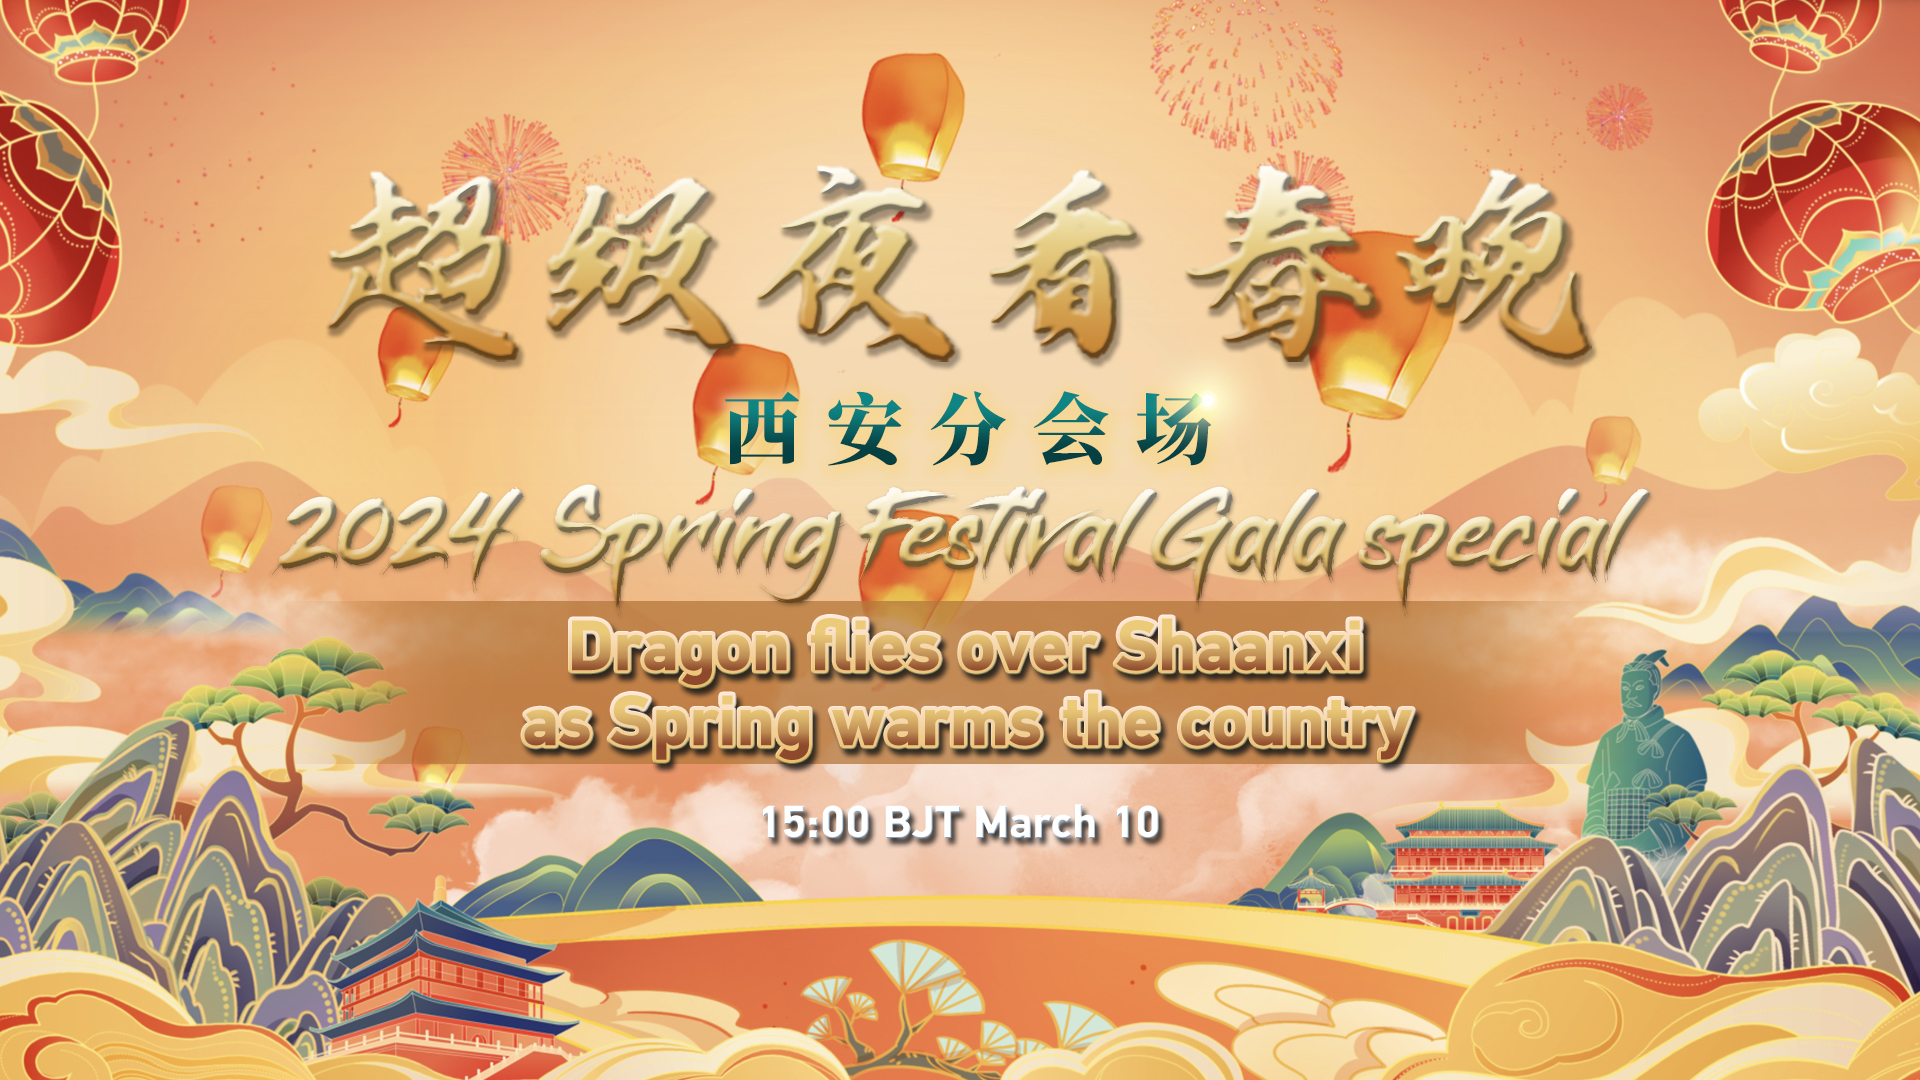 Live: 2024 Spring Festival Gala special - Dragon flies over Shaanxi as spring warms the country